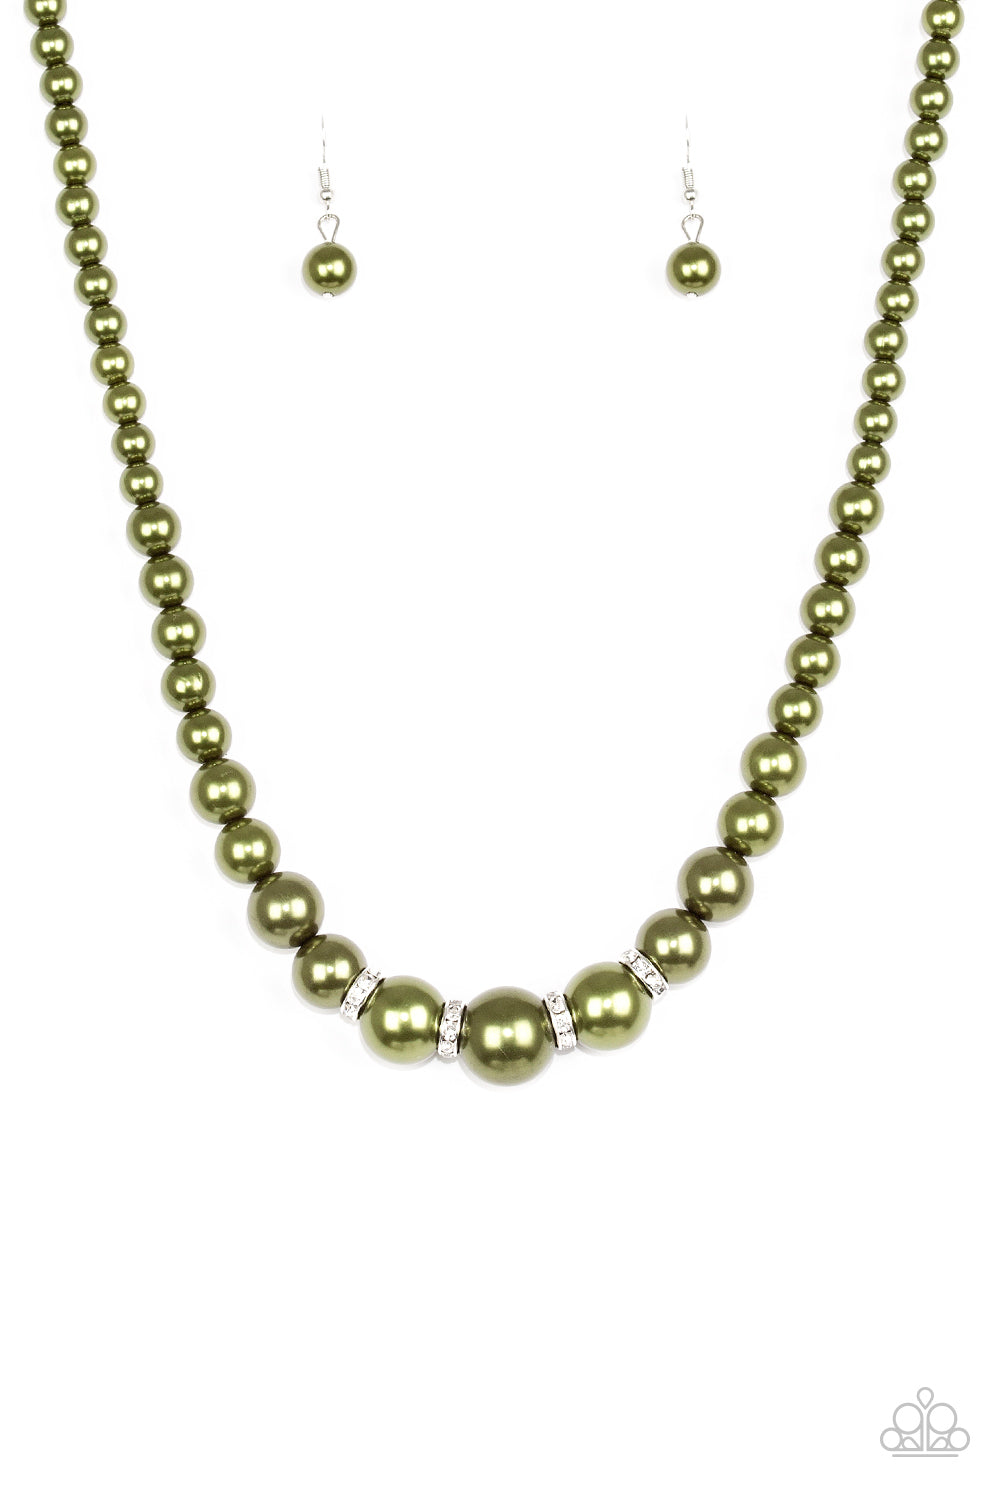 Party Pearls - Paparazzi - Green Pearl White Rhinestone Necklace